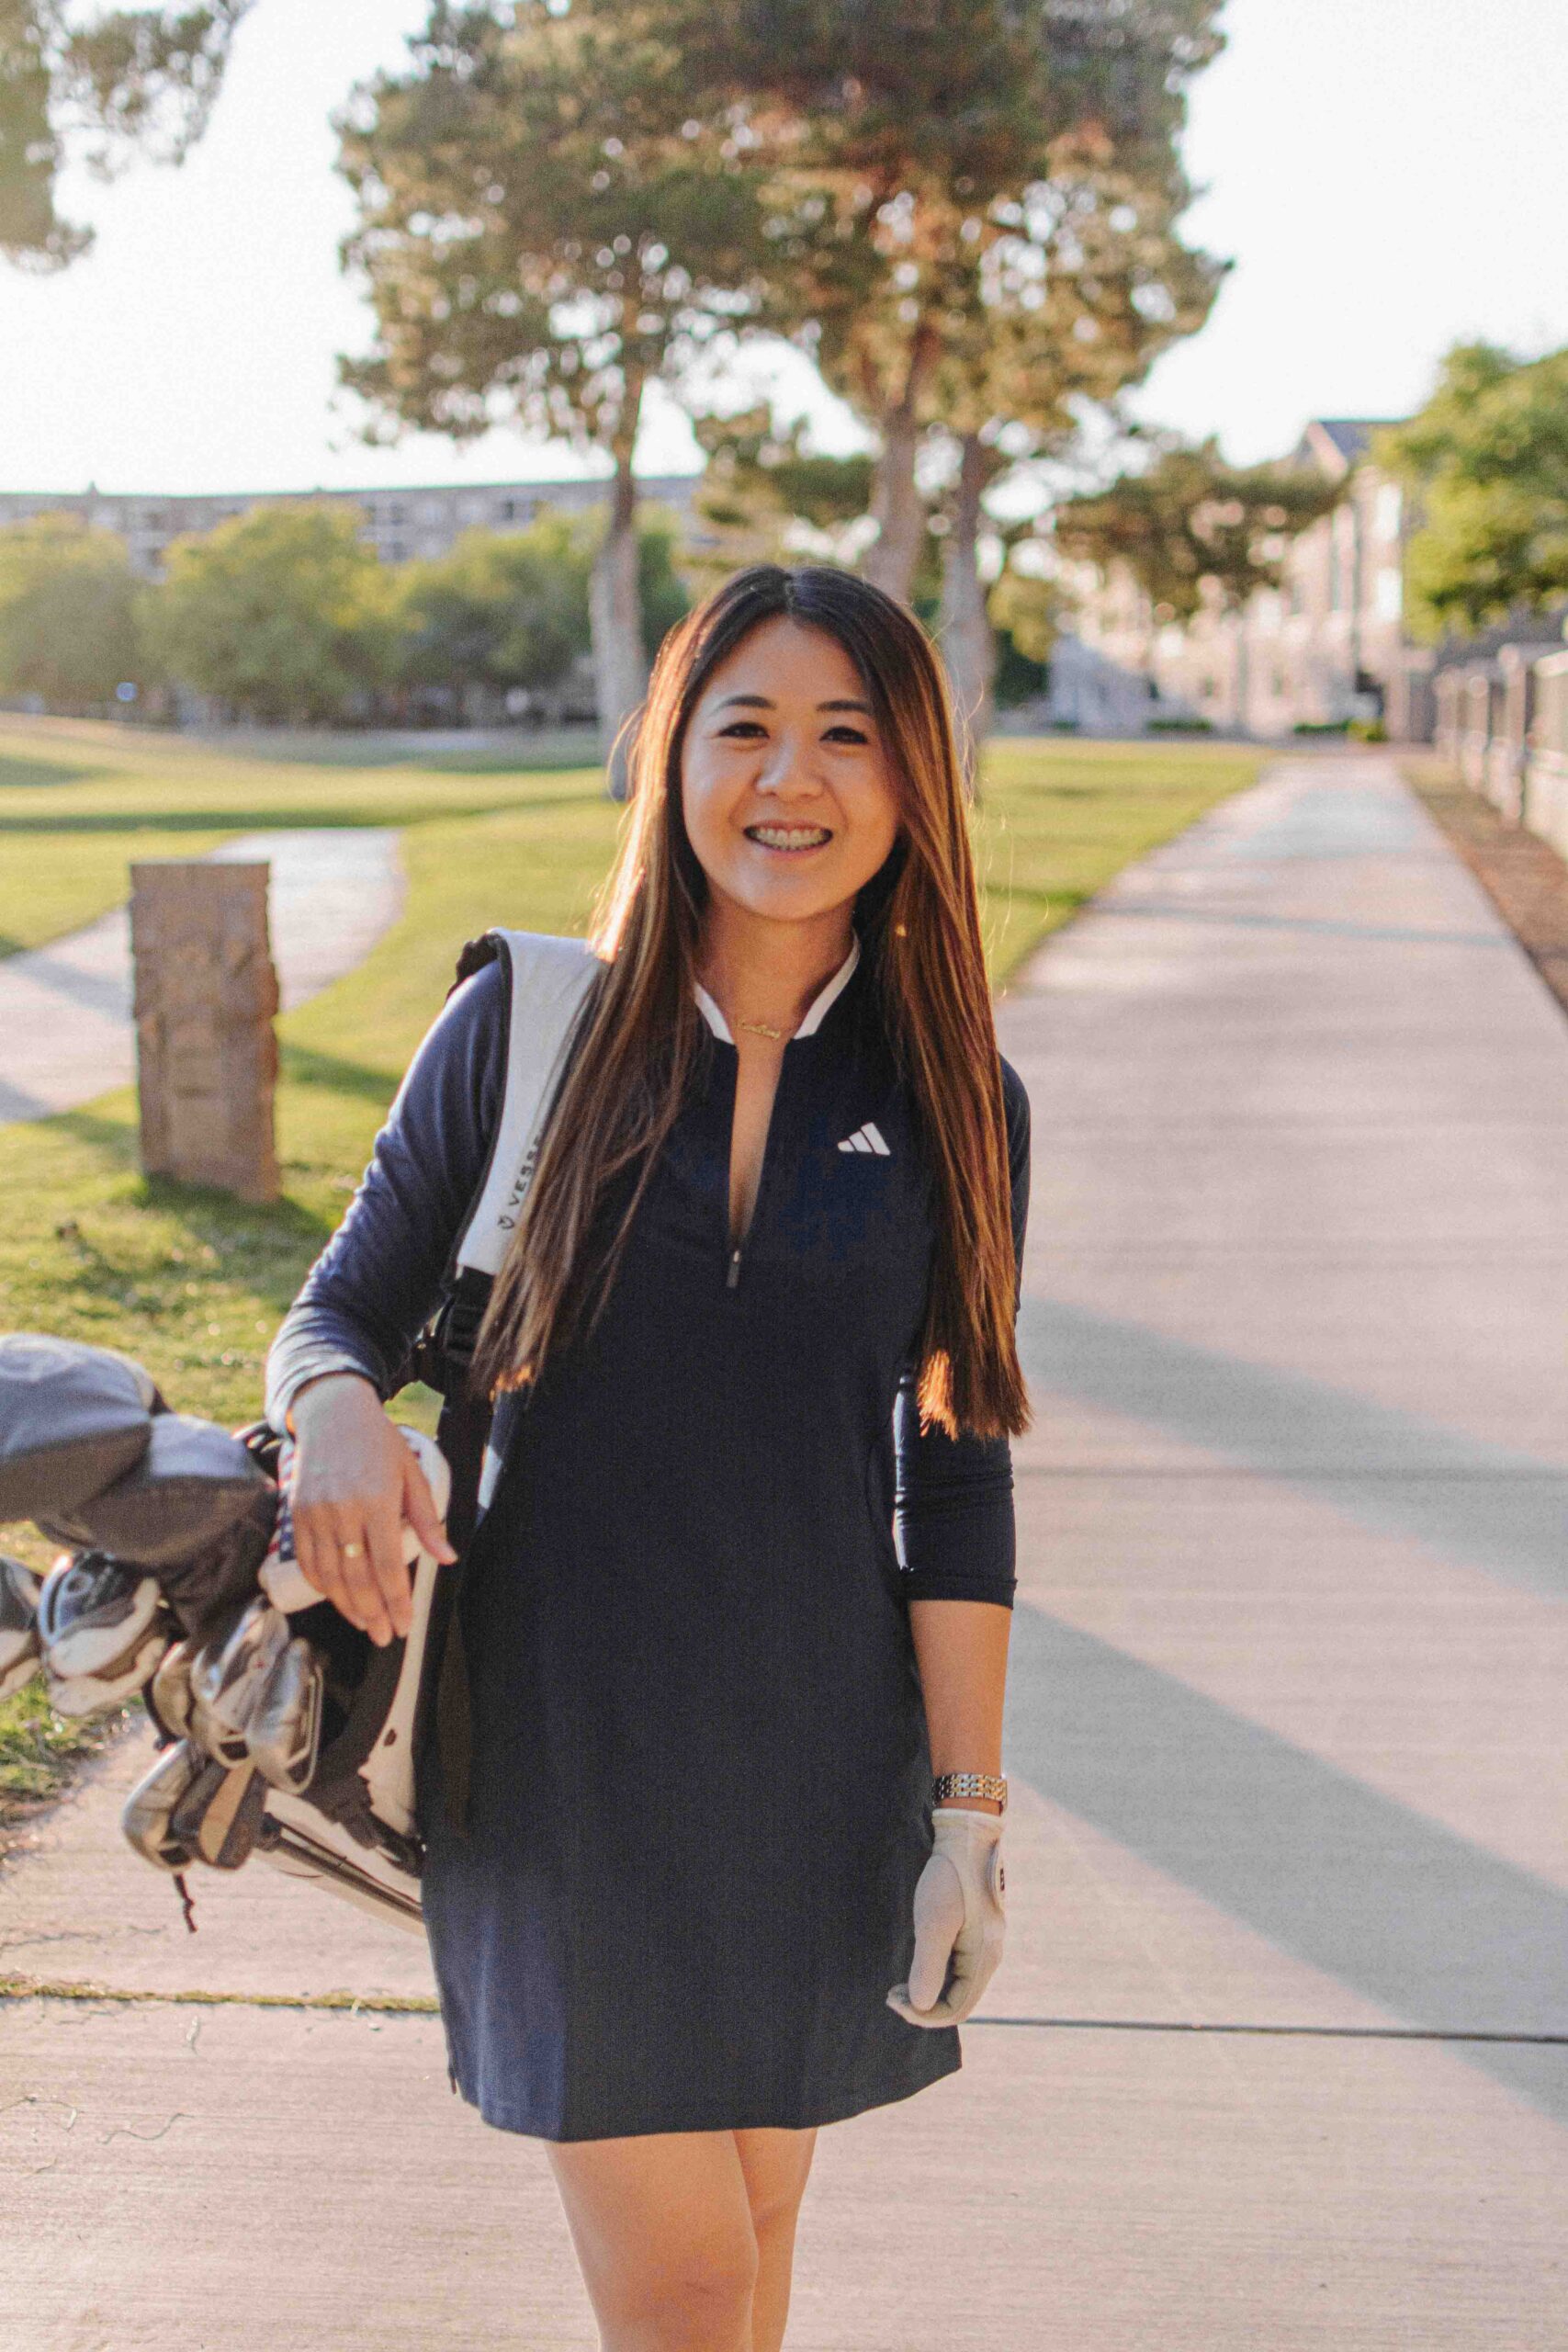 Arizona blogger Demi Bang talks about golf clothes for women.